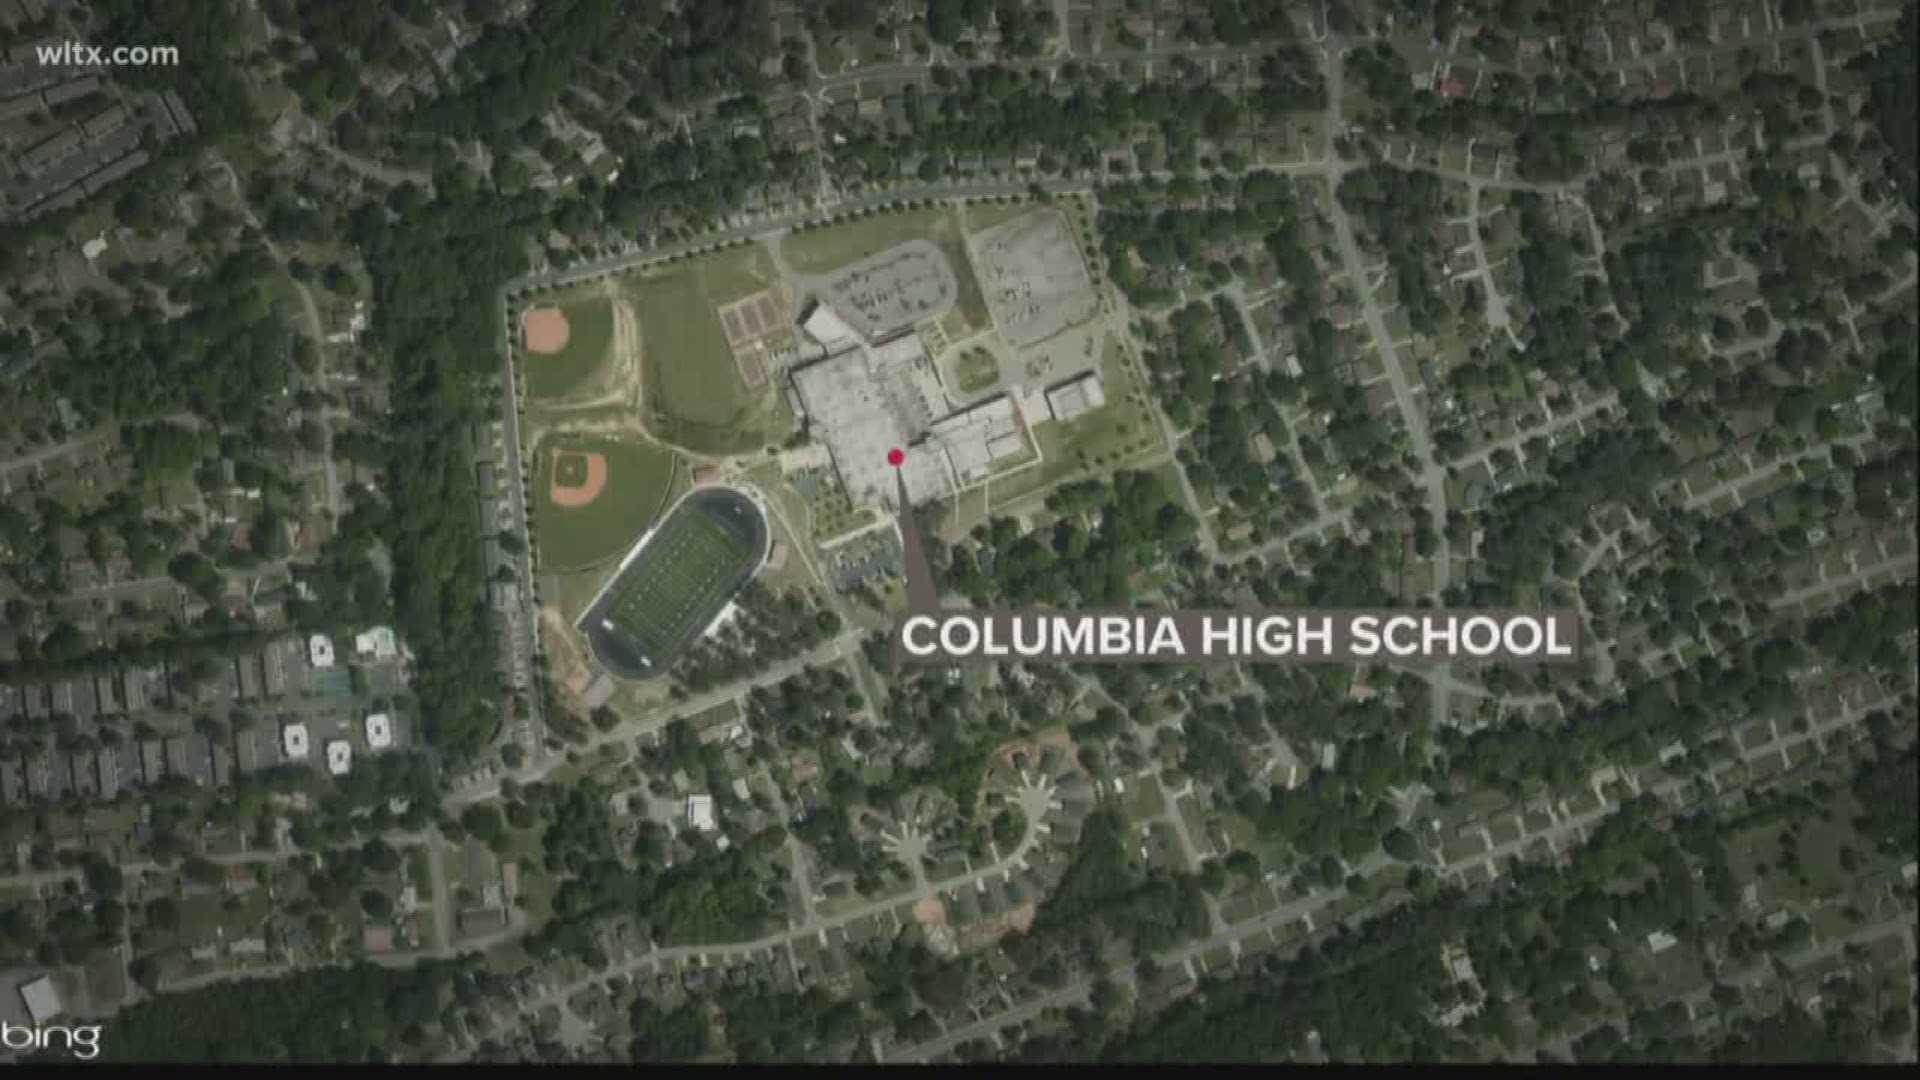 Two Columbia High School students have been arrested after they brought a loaded gun on the school's campus.